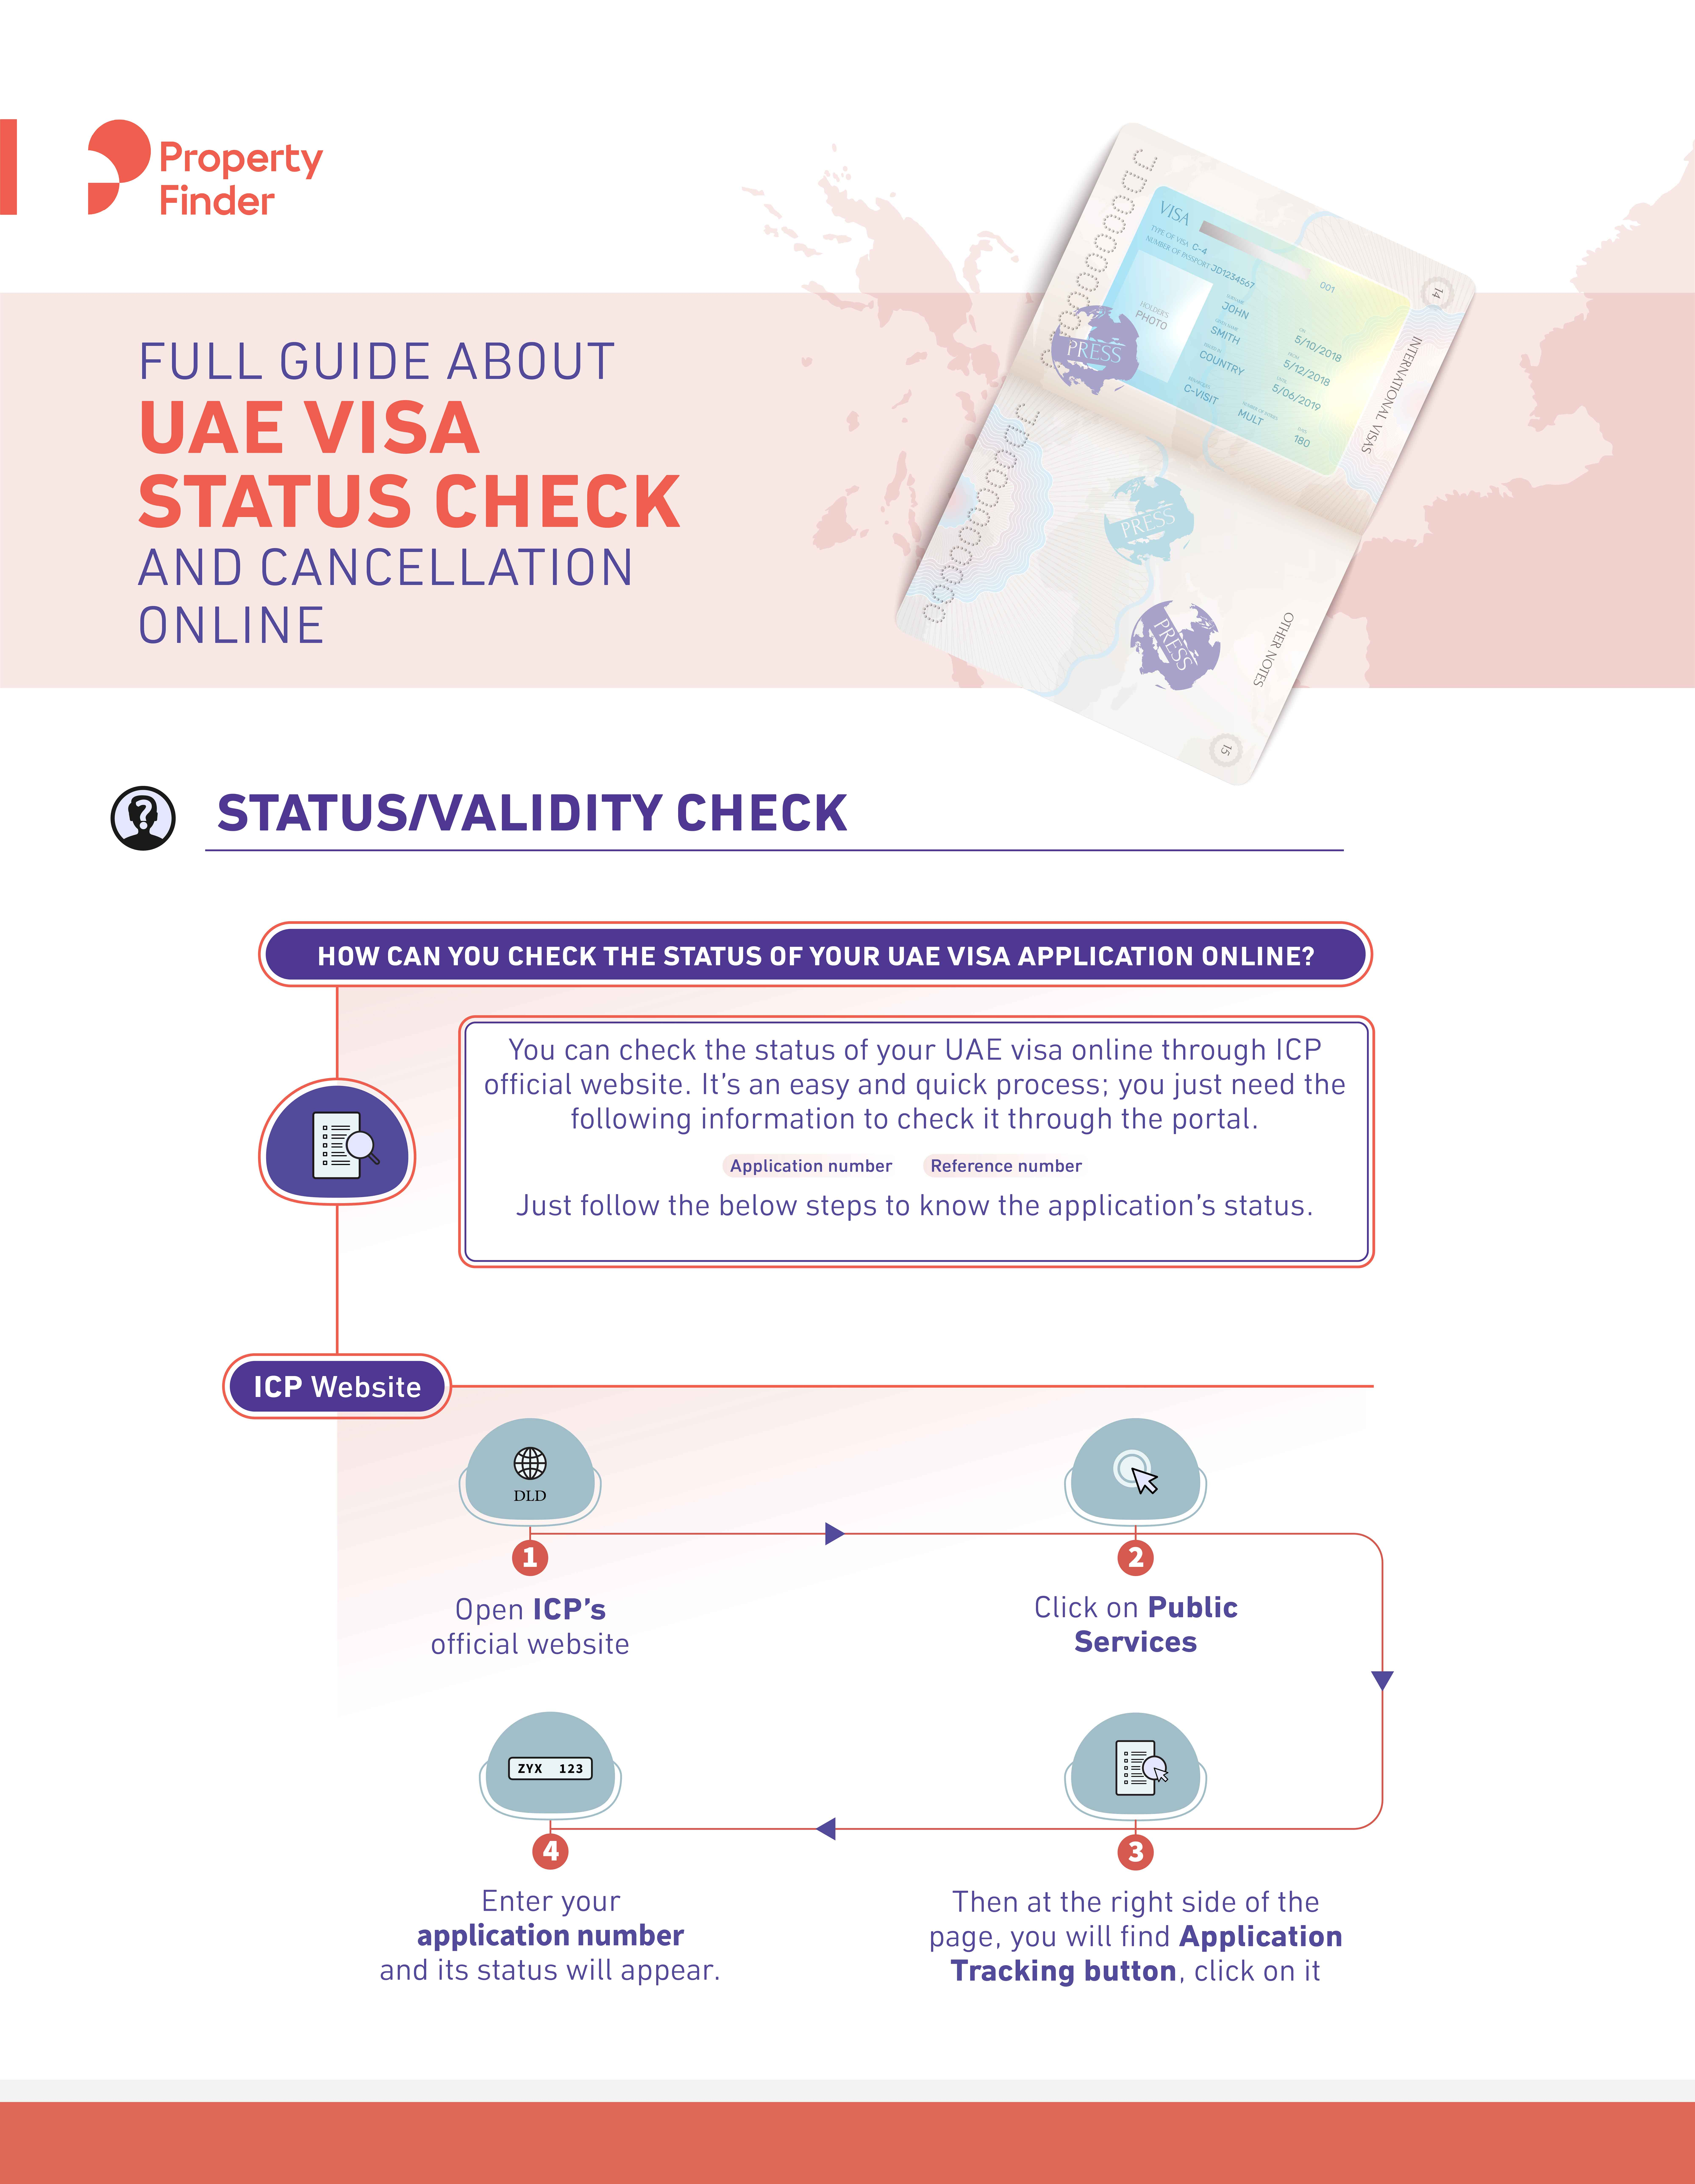 How Can You Check the Status of Your UAE Visa Application Online